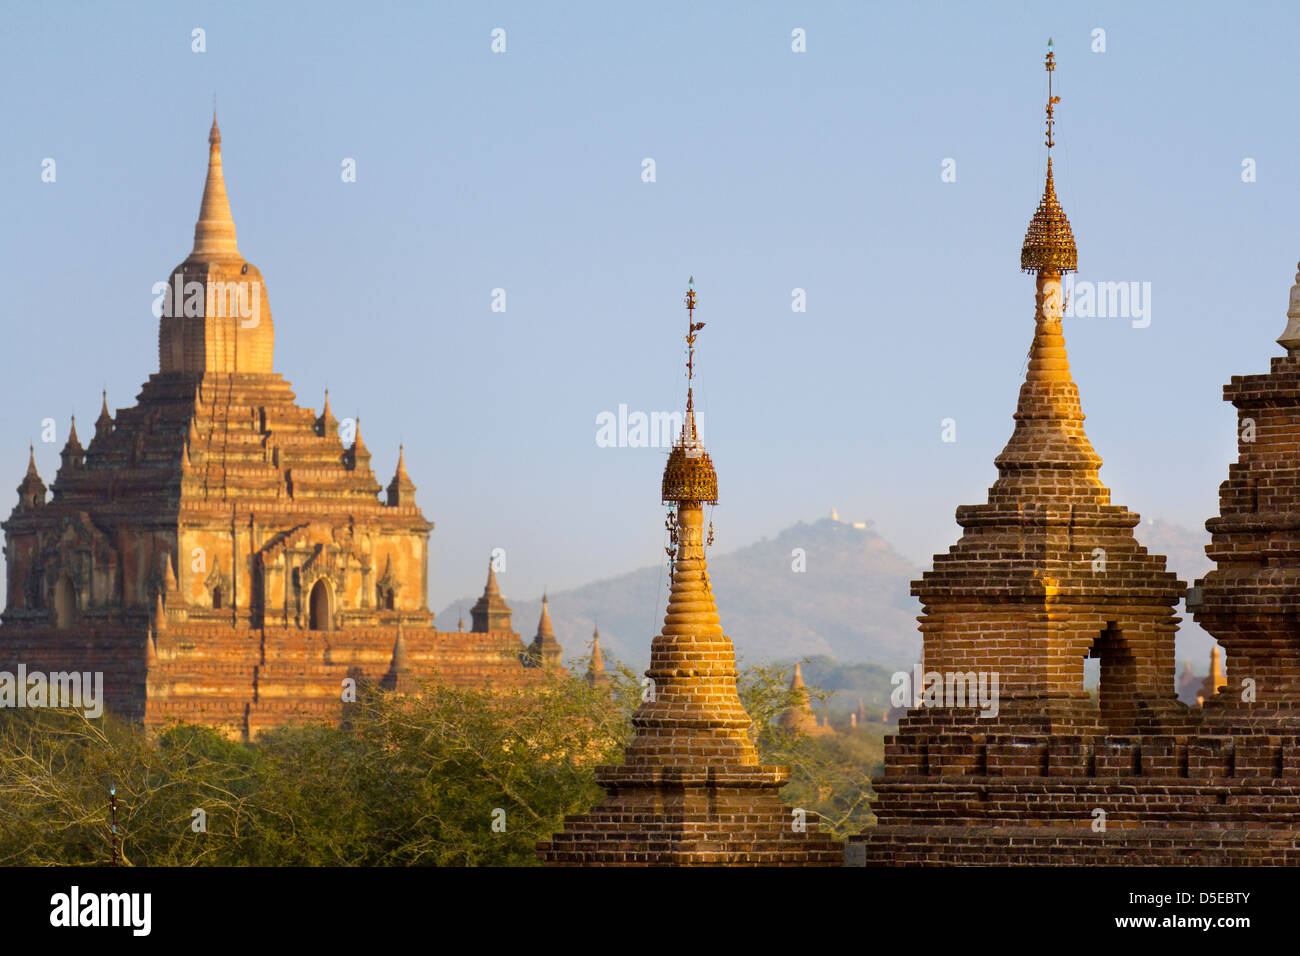 The Temples and Pagodas of Bagan, Myanmar - early morning 13 Stock Photo